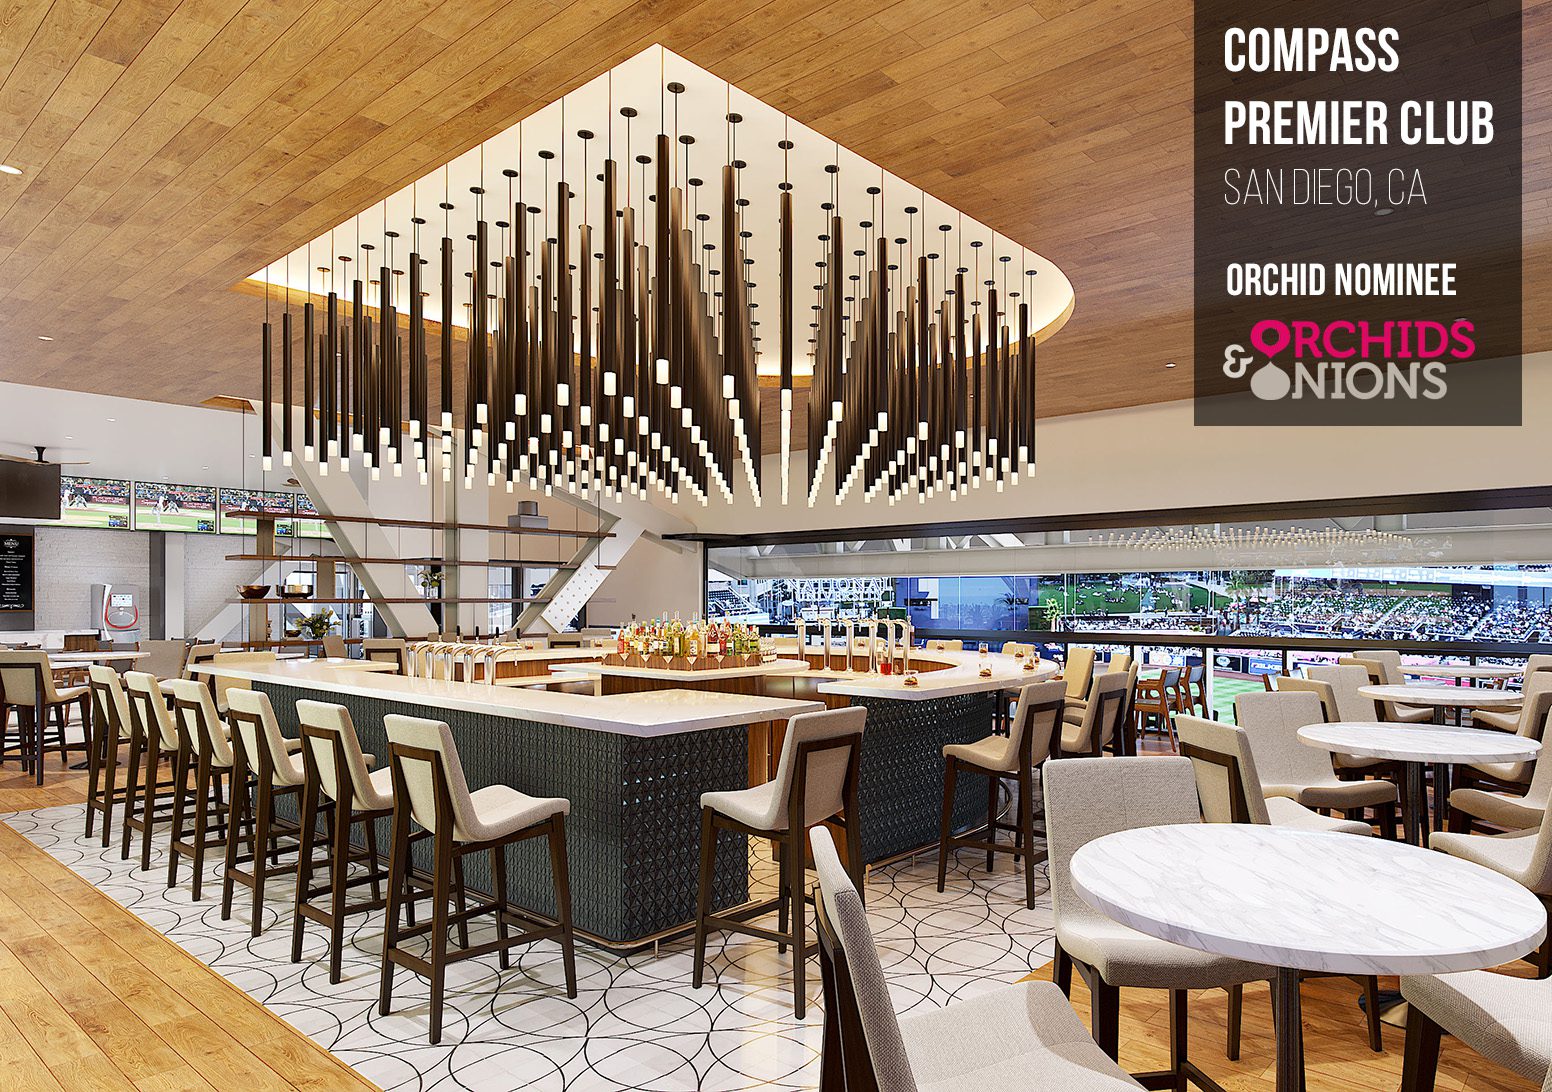 Compass Premier Club and Cutwater Spirits Coronado Club Nominated for 2021  SDAF Orchid Awards - Carrier Johnson + CULTURE